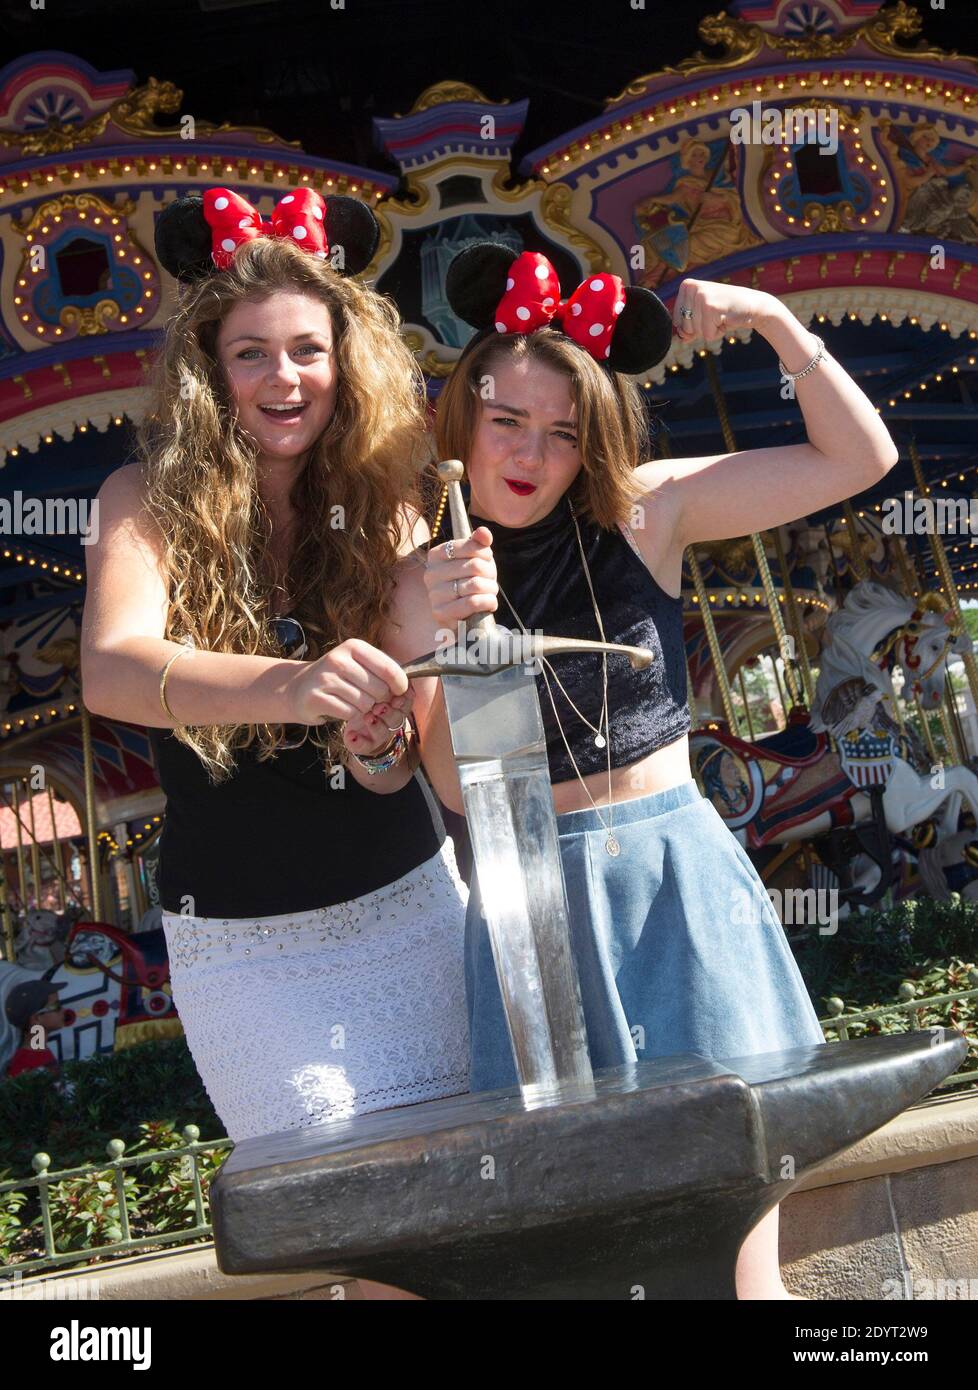 Actress Maisie Williams (right), who portrays Arya Stark on the HBO series 'Game of Thrones,' poses with her friend Cassidy Waterhouse (left), after pulling the sword from the stone at the Magic Kingdom park at Walt Disney World Resort in Lake Buena Vista, Florida on August 29, 2013. The 16-year-old English actress has starred on the award-winning series since its premiere episode. Photo by Gene Duncan/Disney Handout/ABACAPRESS.COM Stock Photo